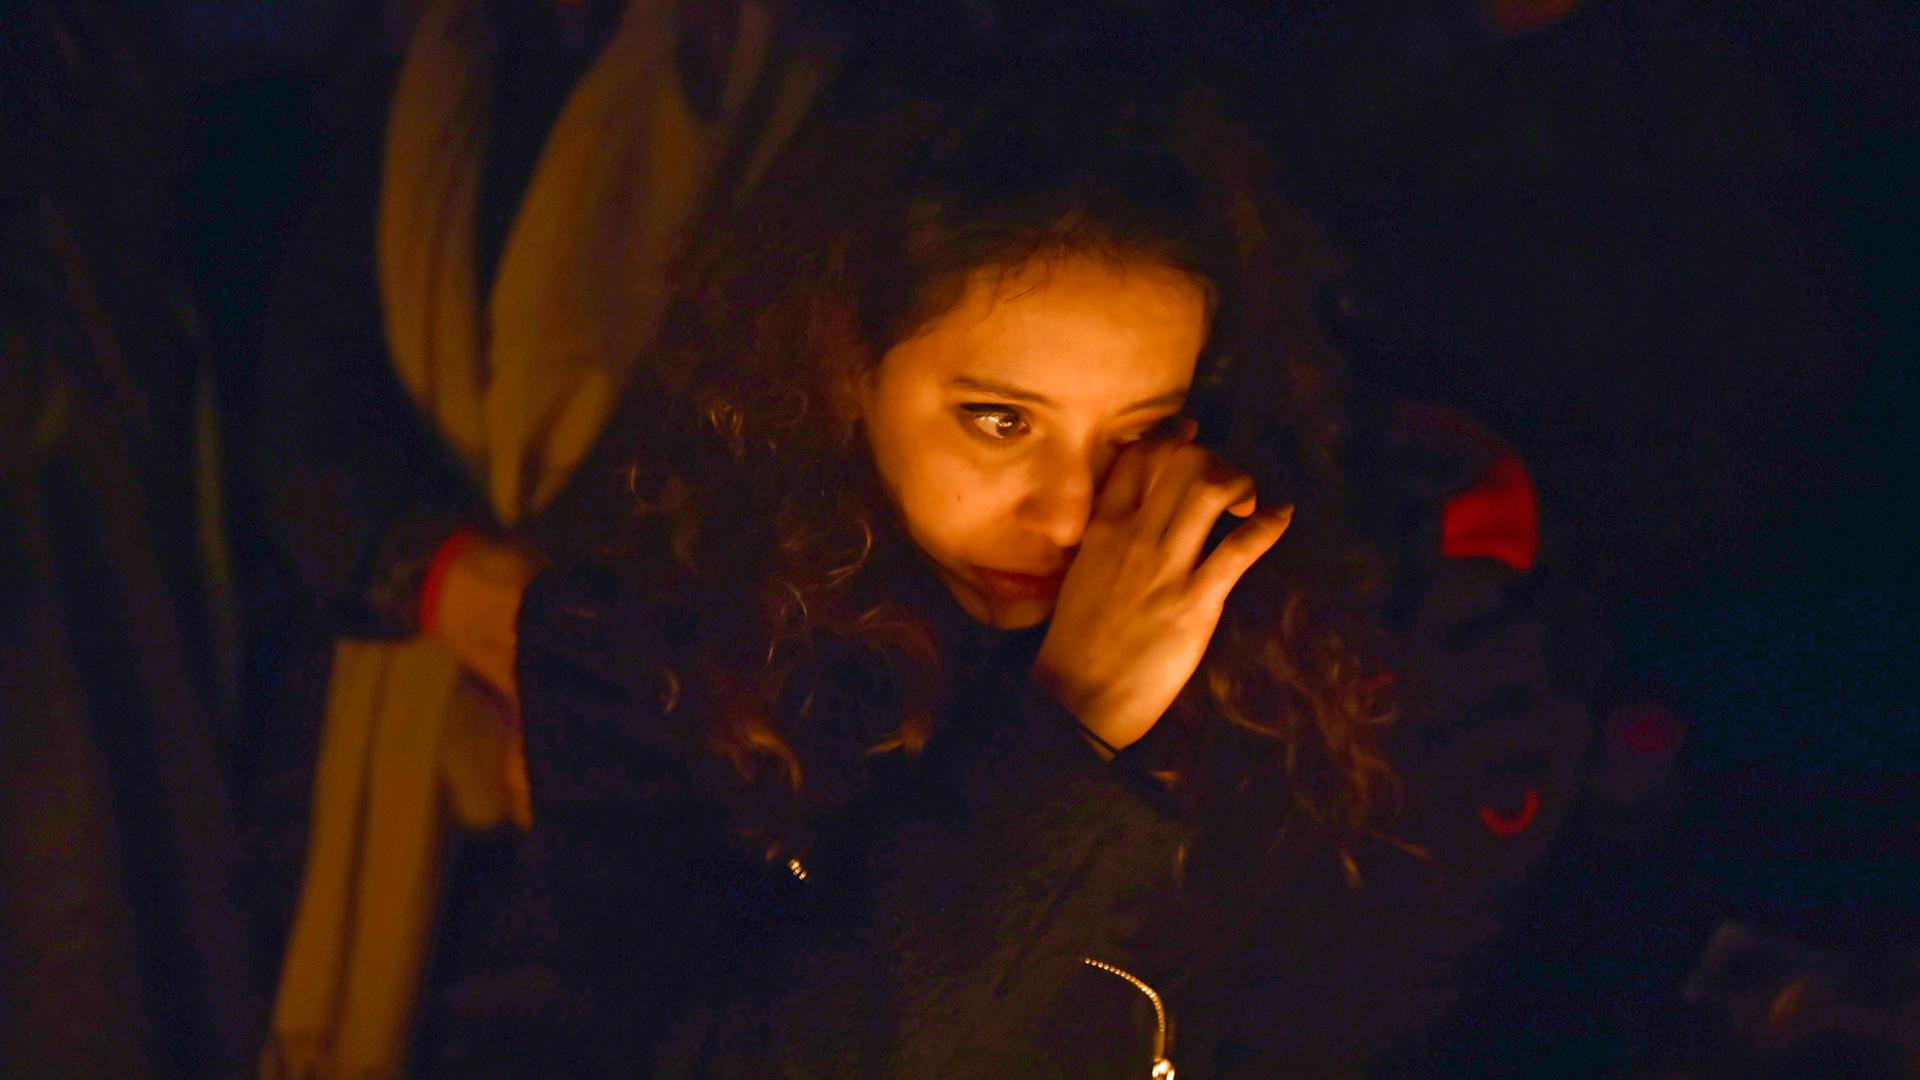 A woman in Trafalgar Square weeps at a vigil for victims of the London terrorist attack